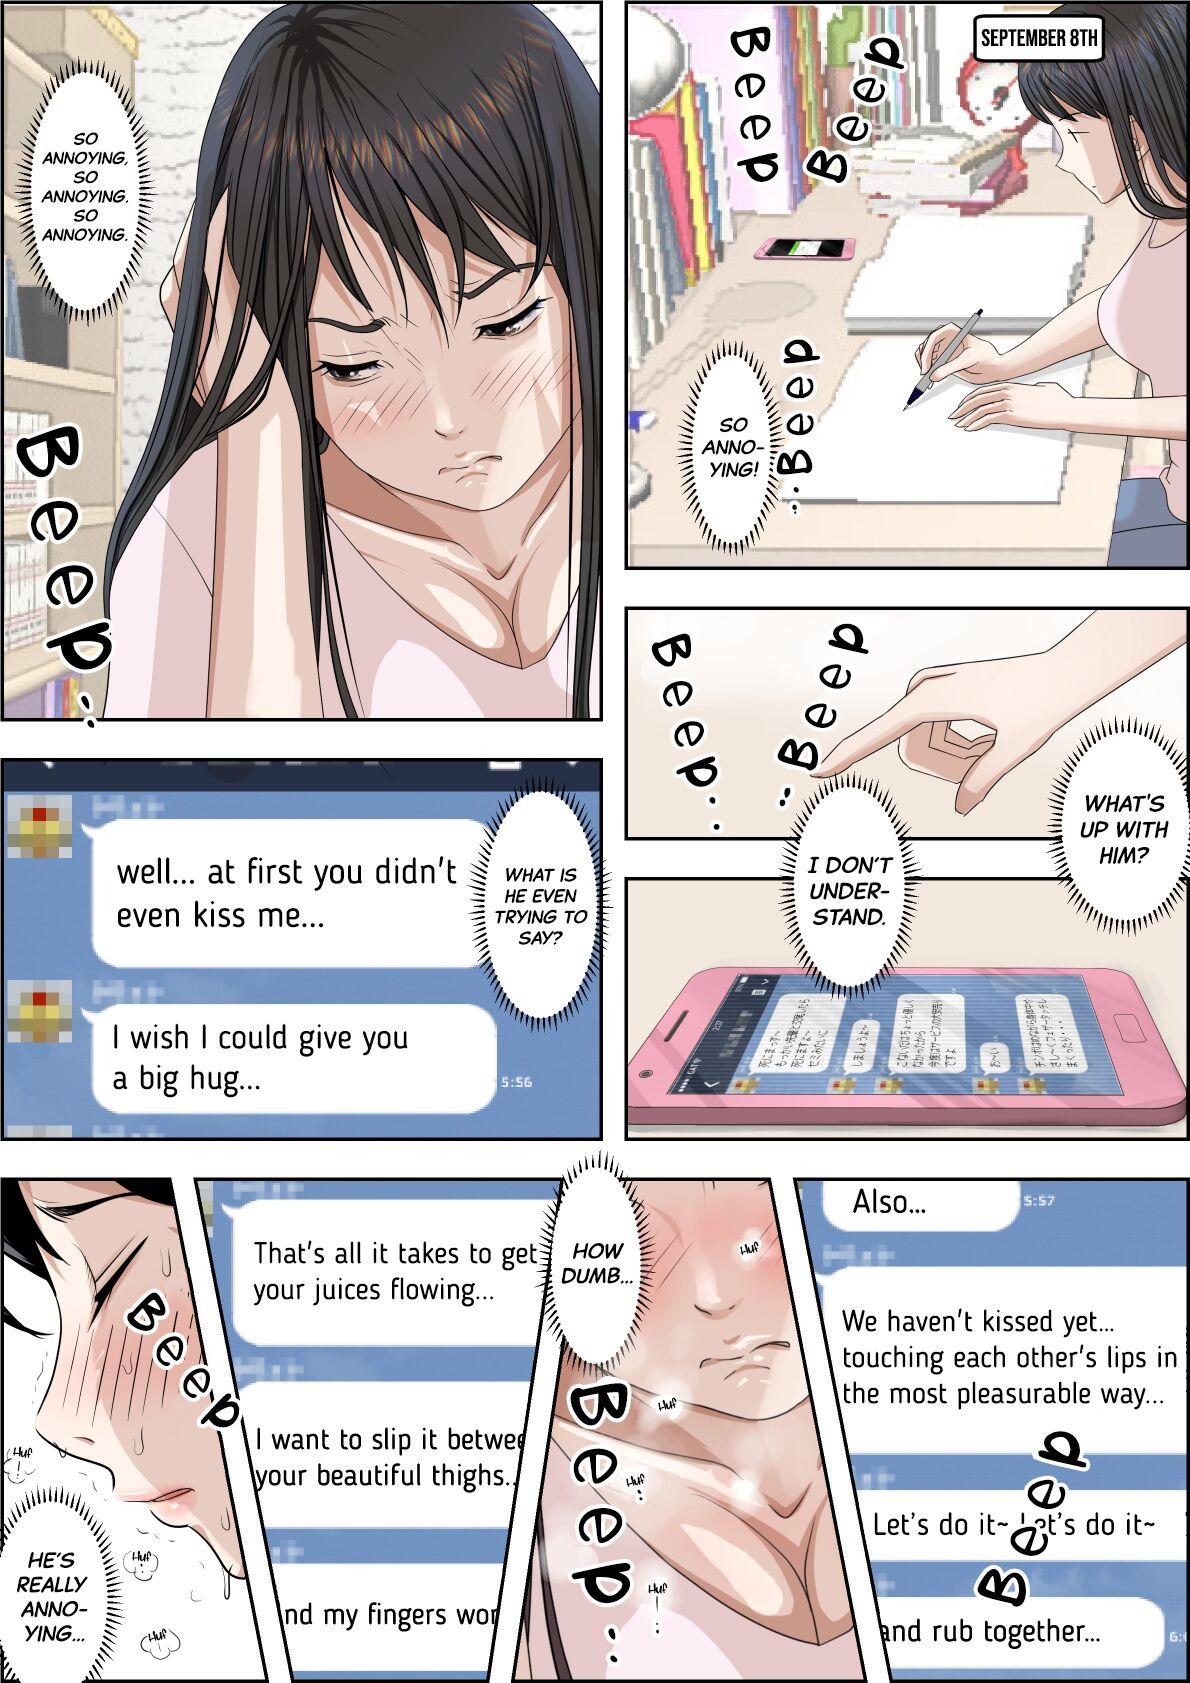 Fun Charao ni Netorare Route 2 Vol.4 | Cuckolded by a playboy Route 2 Vol.4 Gay Kissing - Page 5